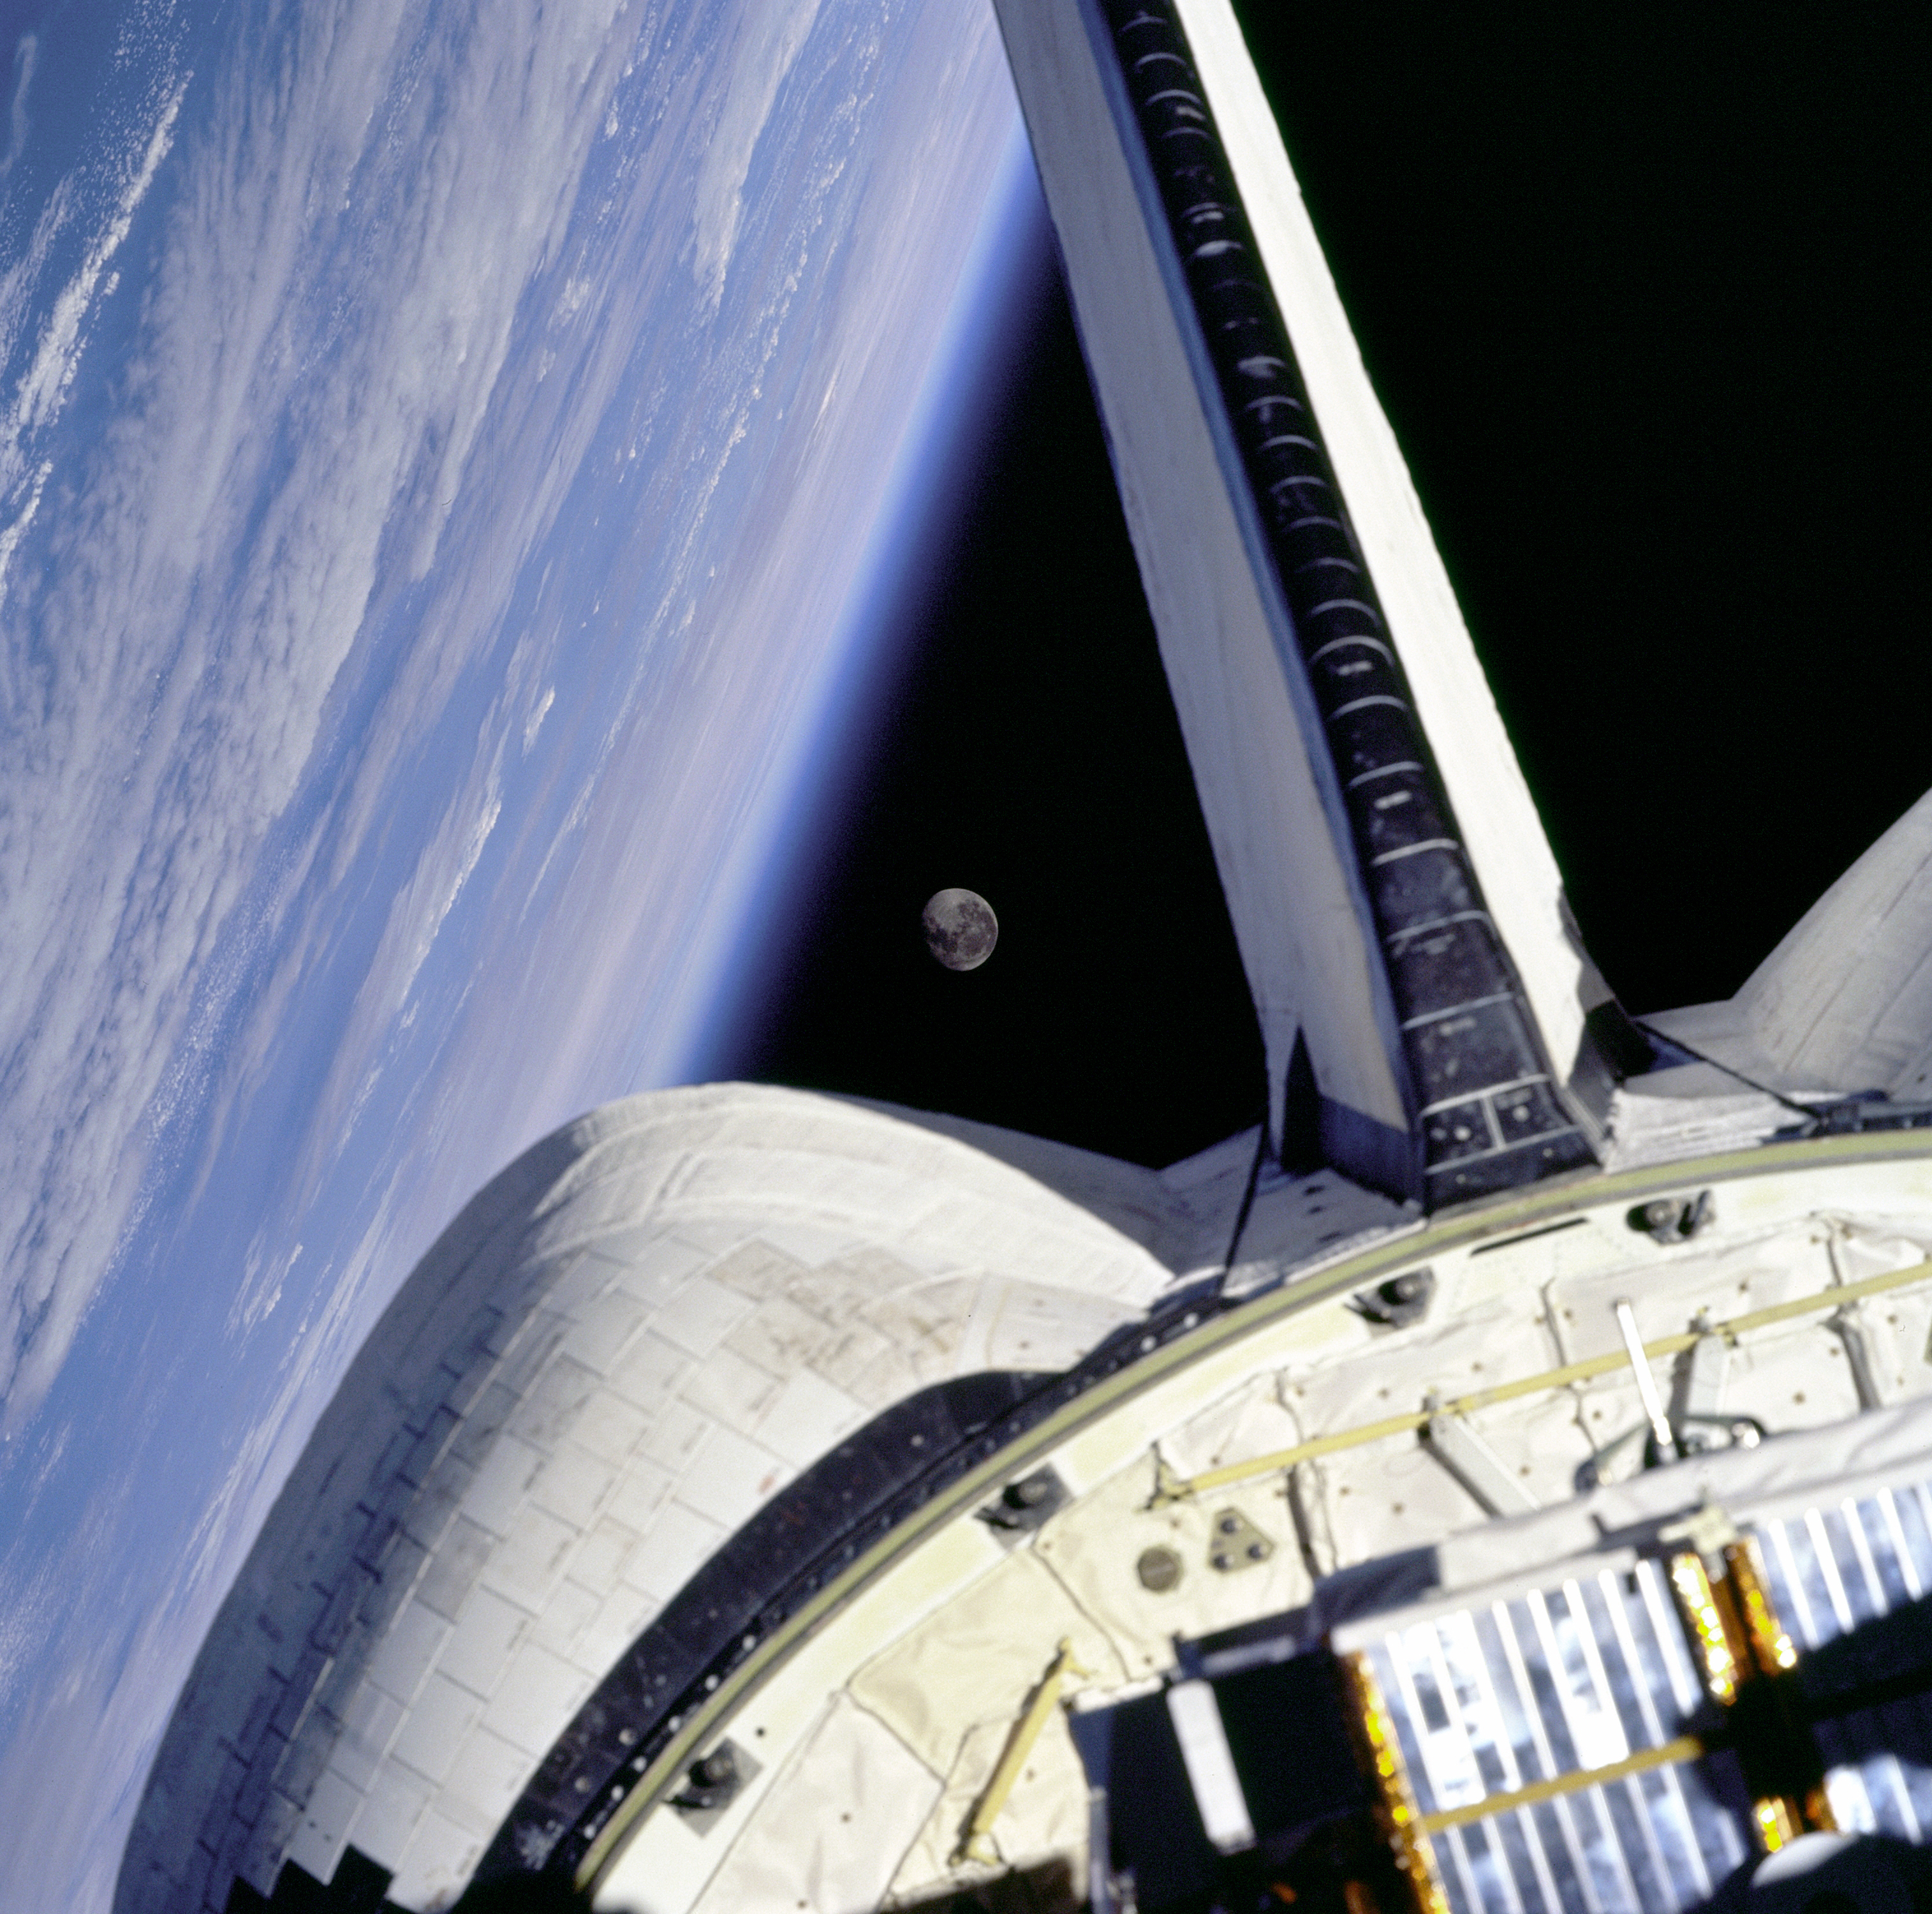 Earth and its Moon are nicely framed in this image taken from the aft windows of the Space Shuttle Discovery in 1998. 